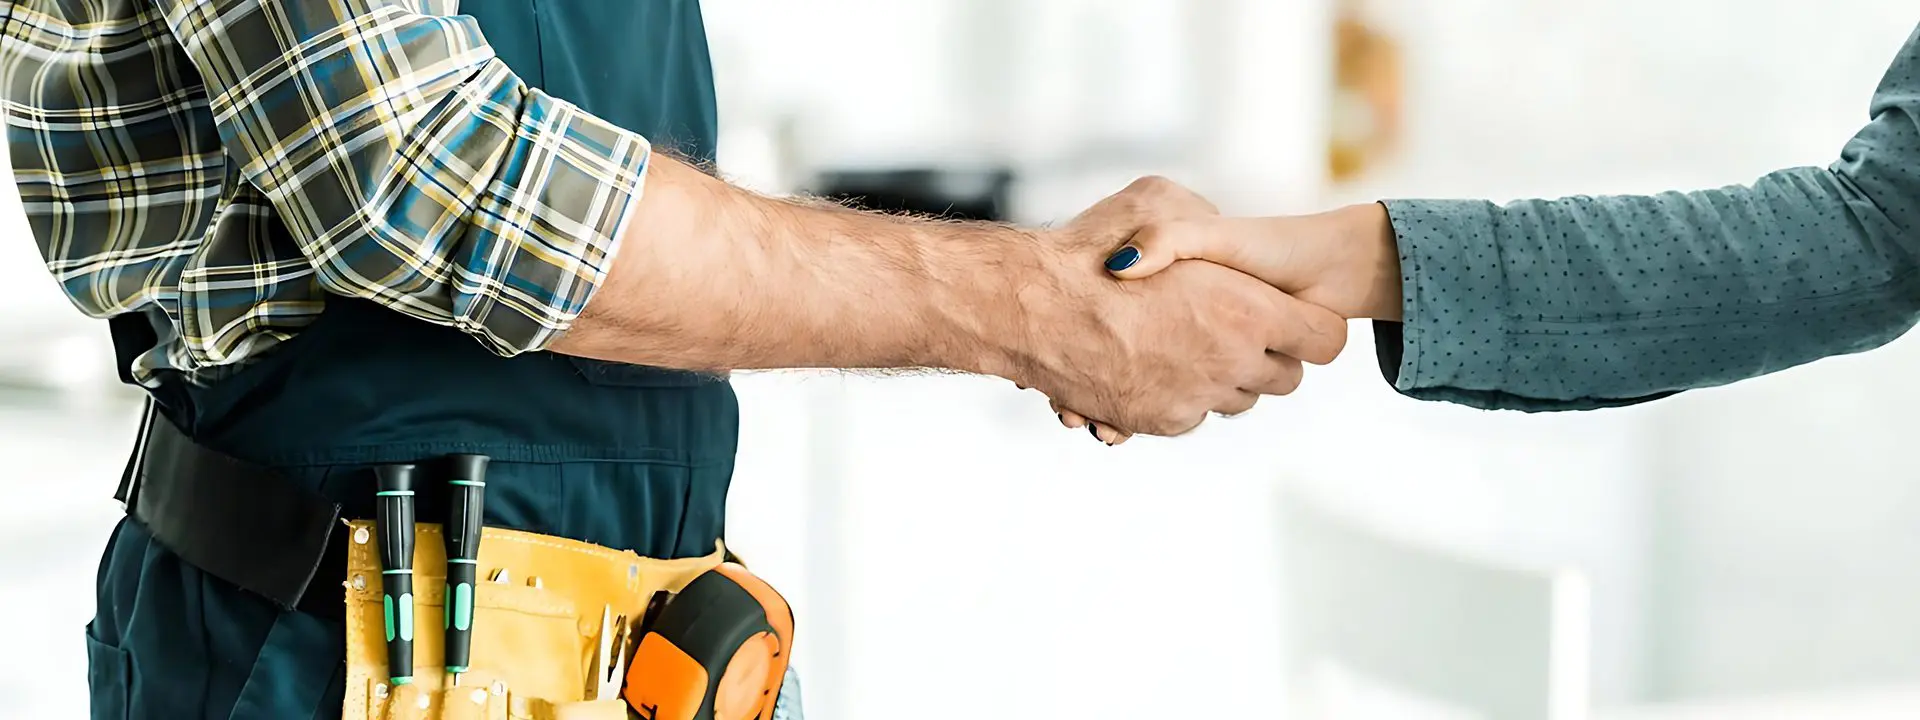 A man shaking hands with another person.